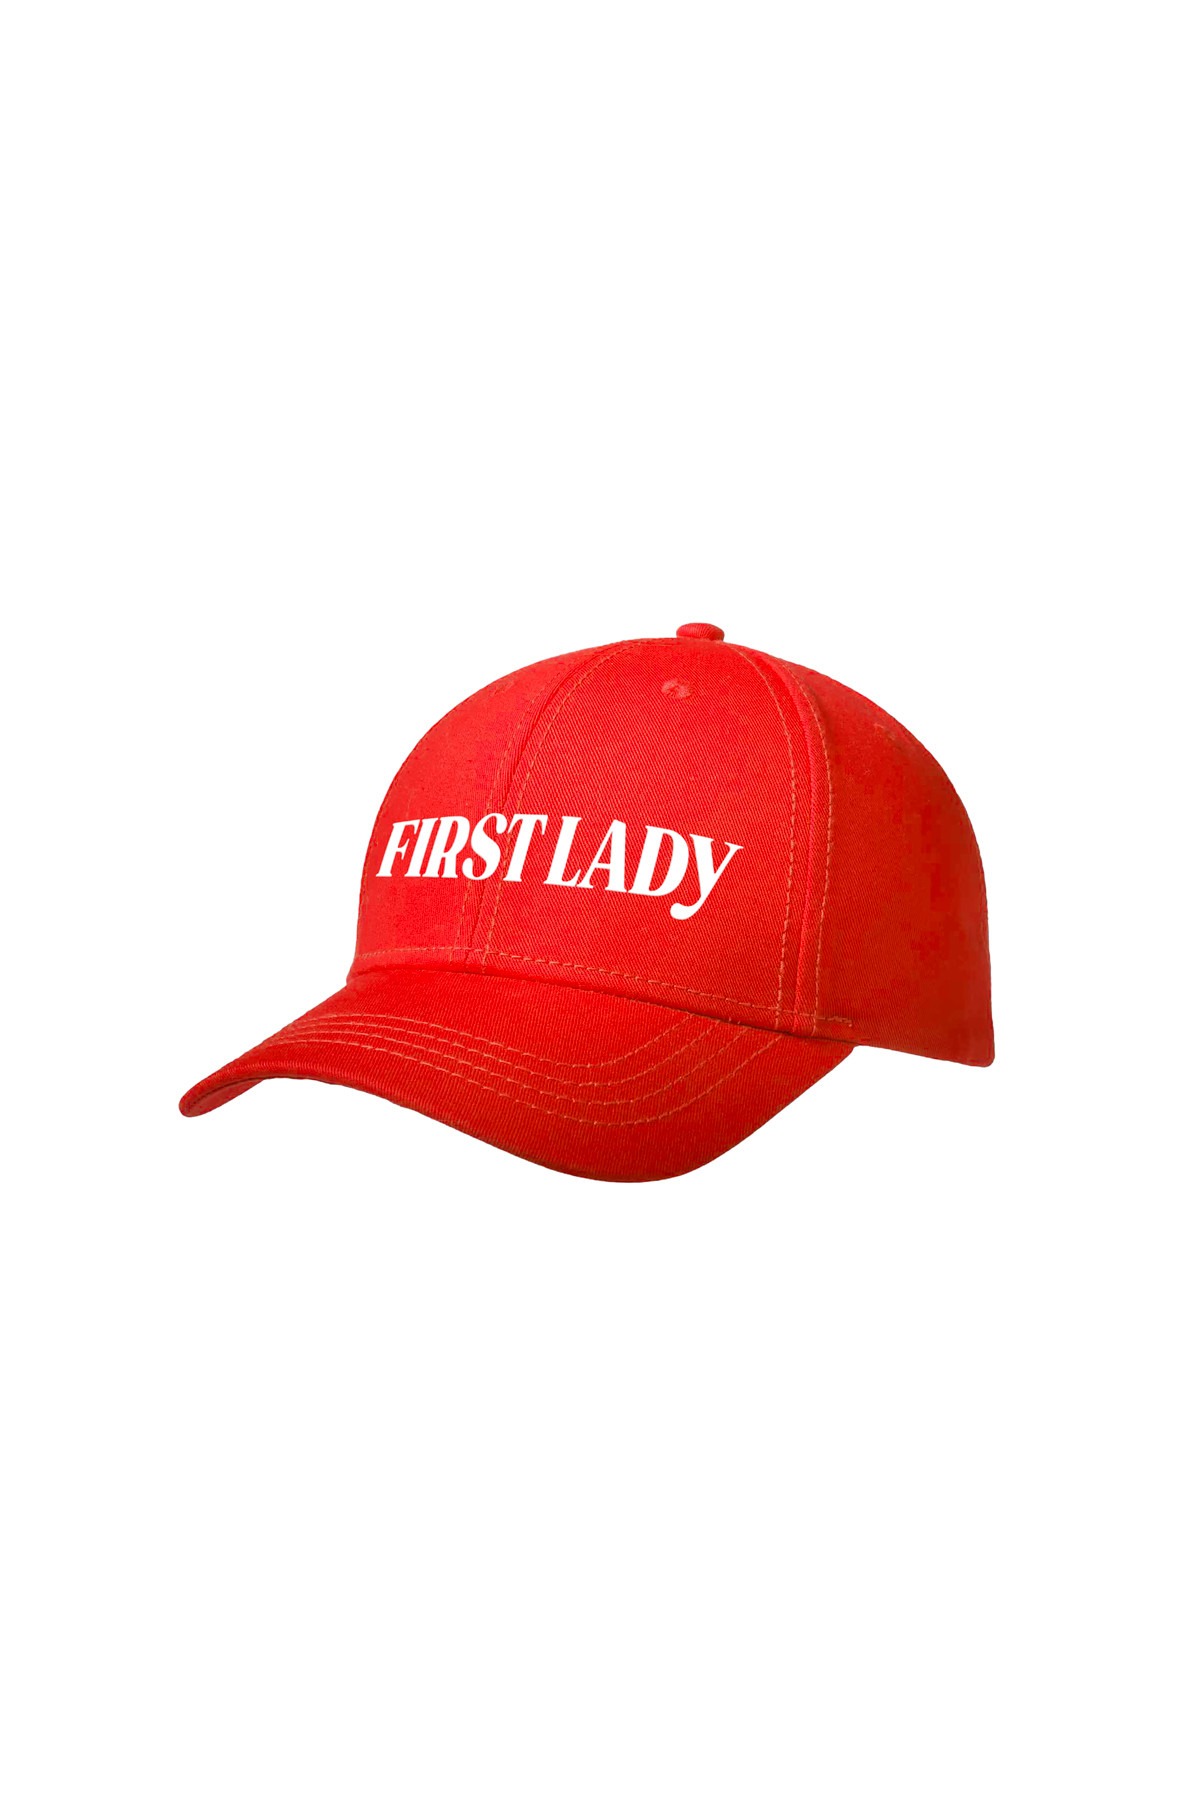 Photo de CASQUETTES Casquette FIRST LADY chez French Disorder